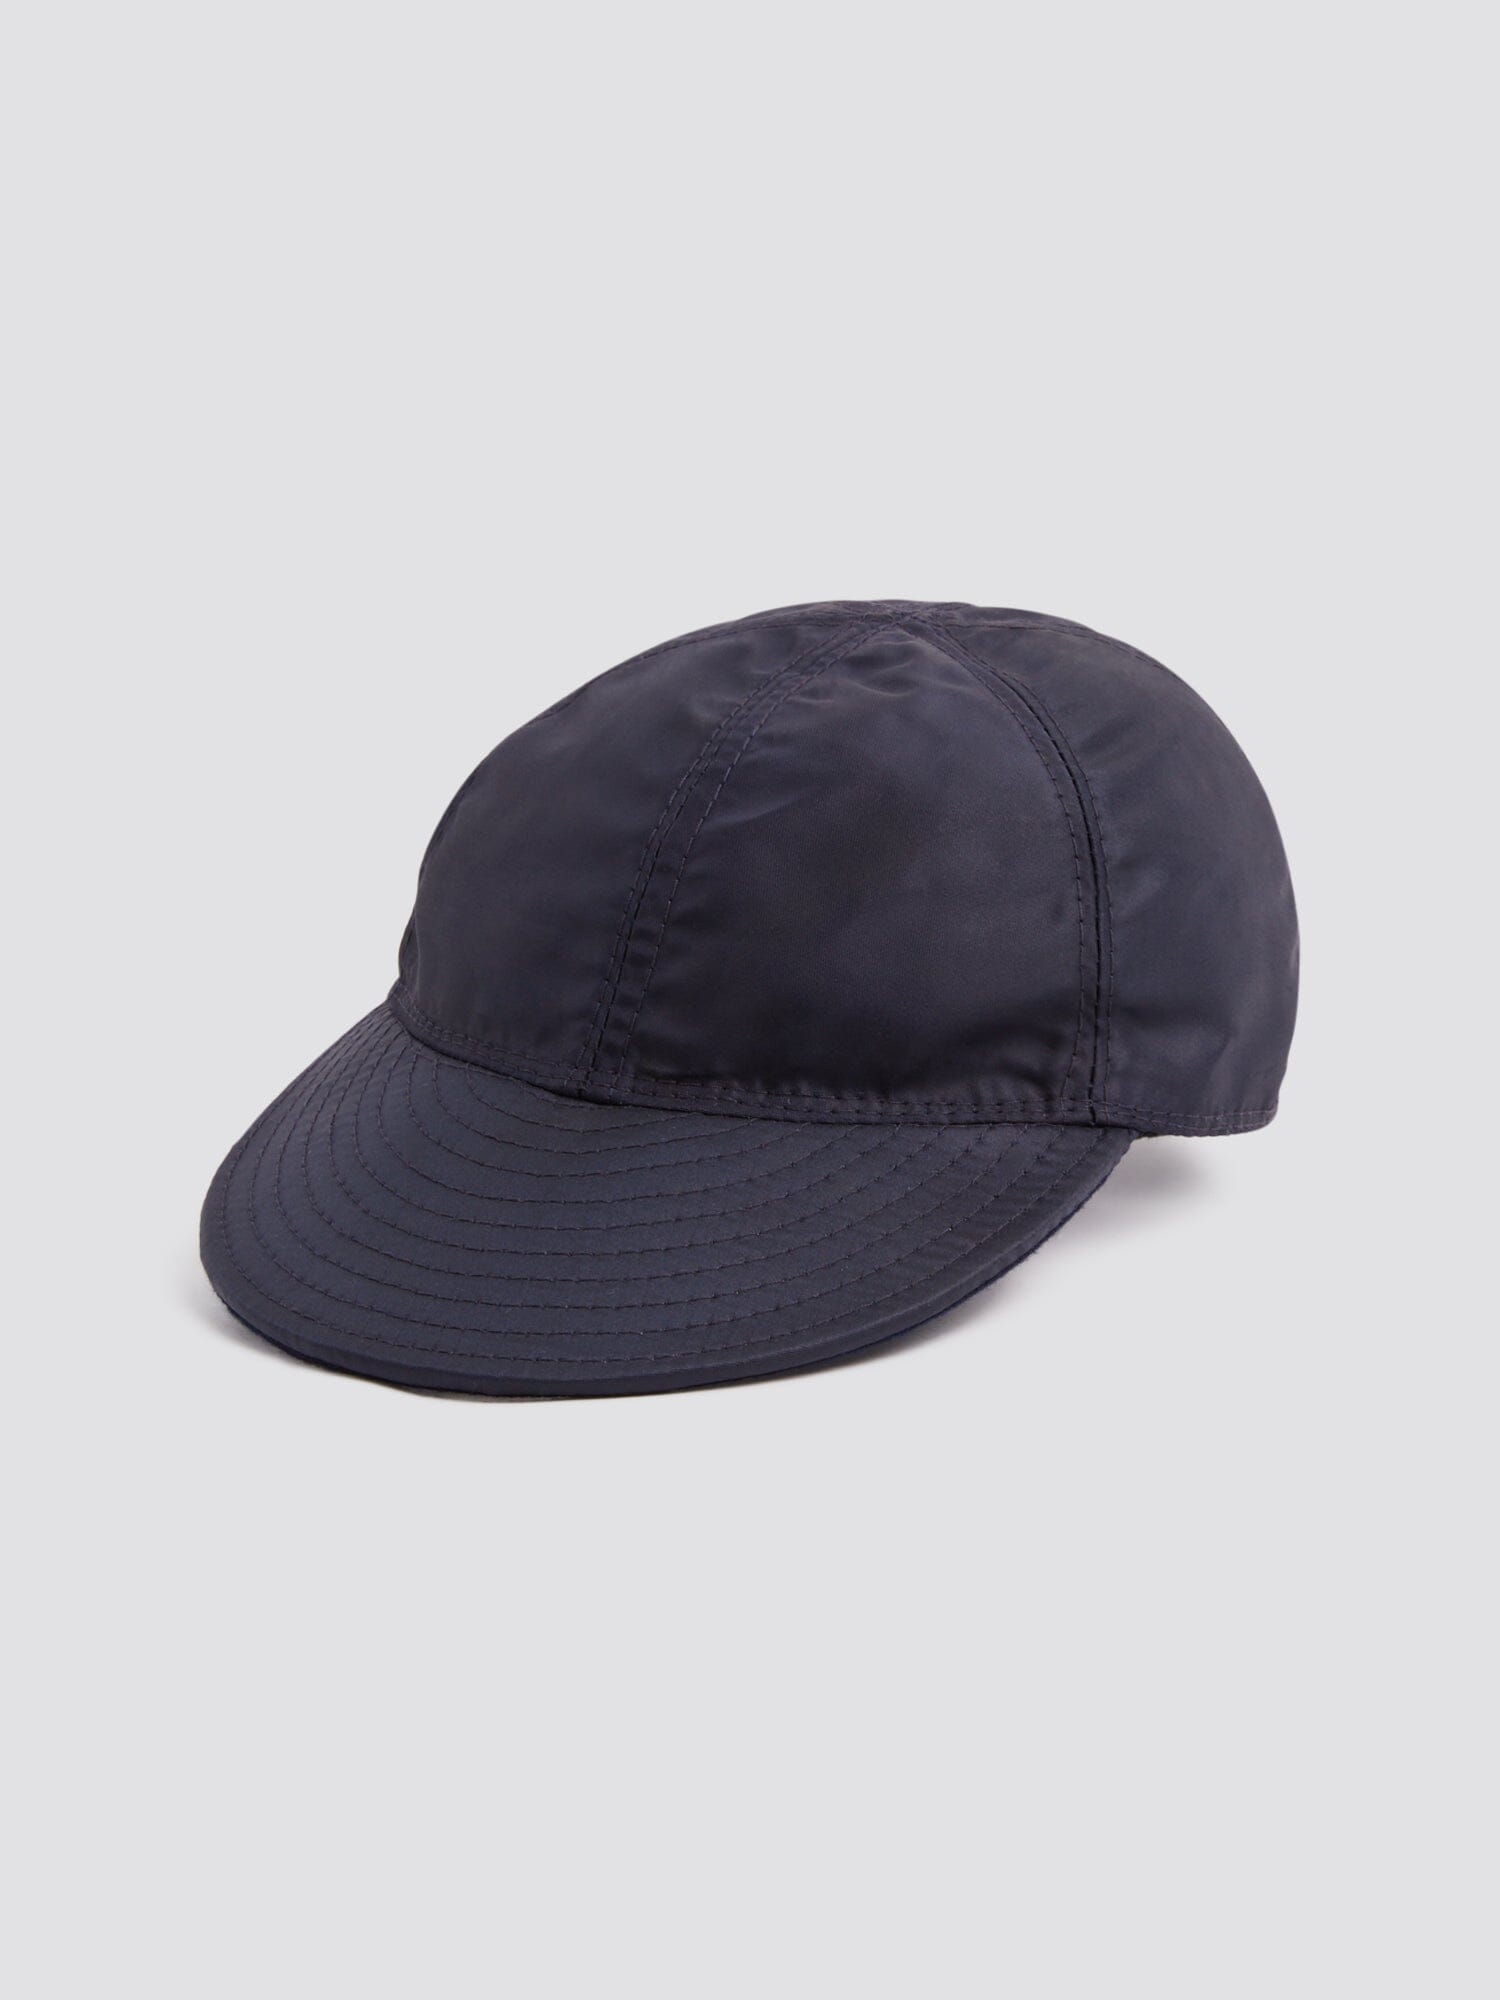 PAPA NUI X ALPHA UPCYCLE CAP ACCESSORY Alpha Industries NAVY L 